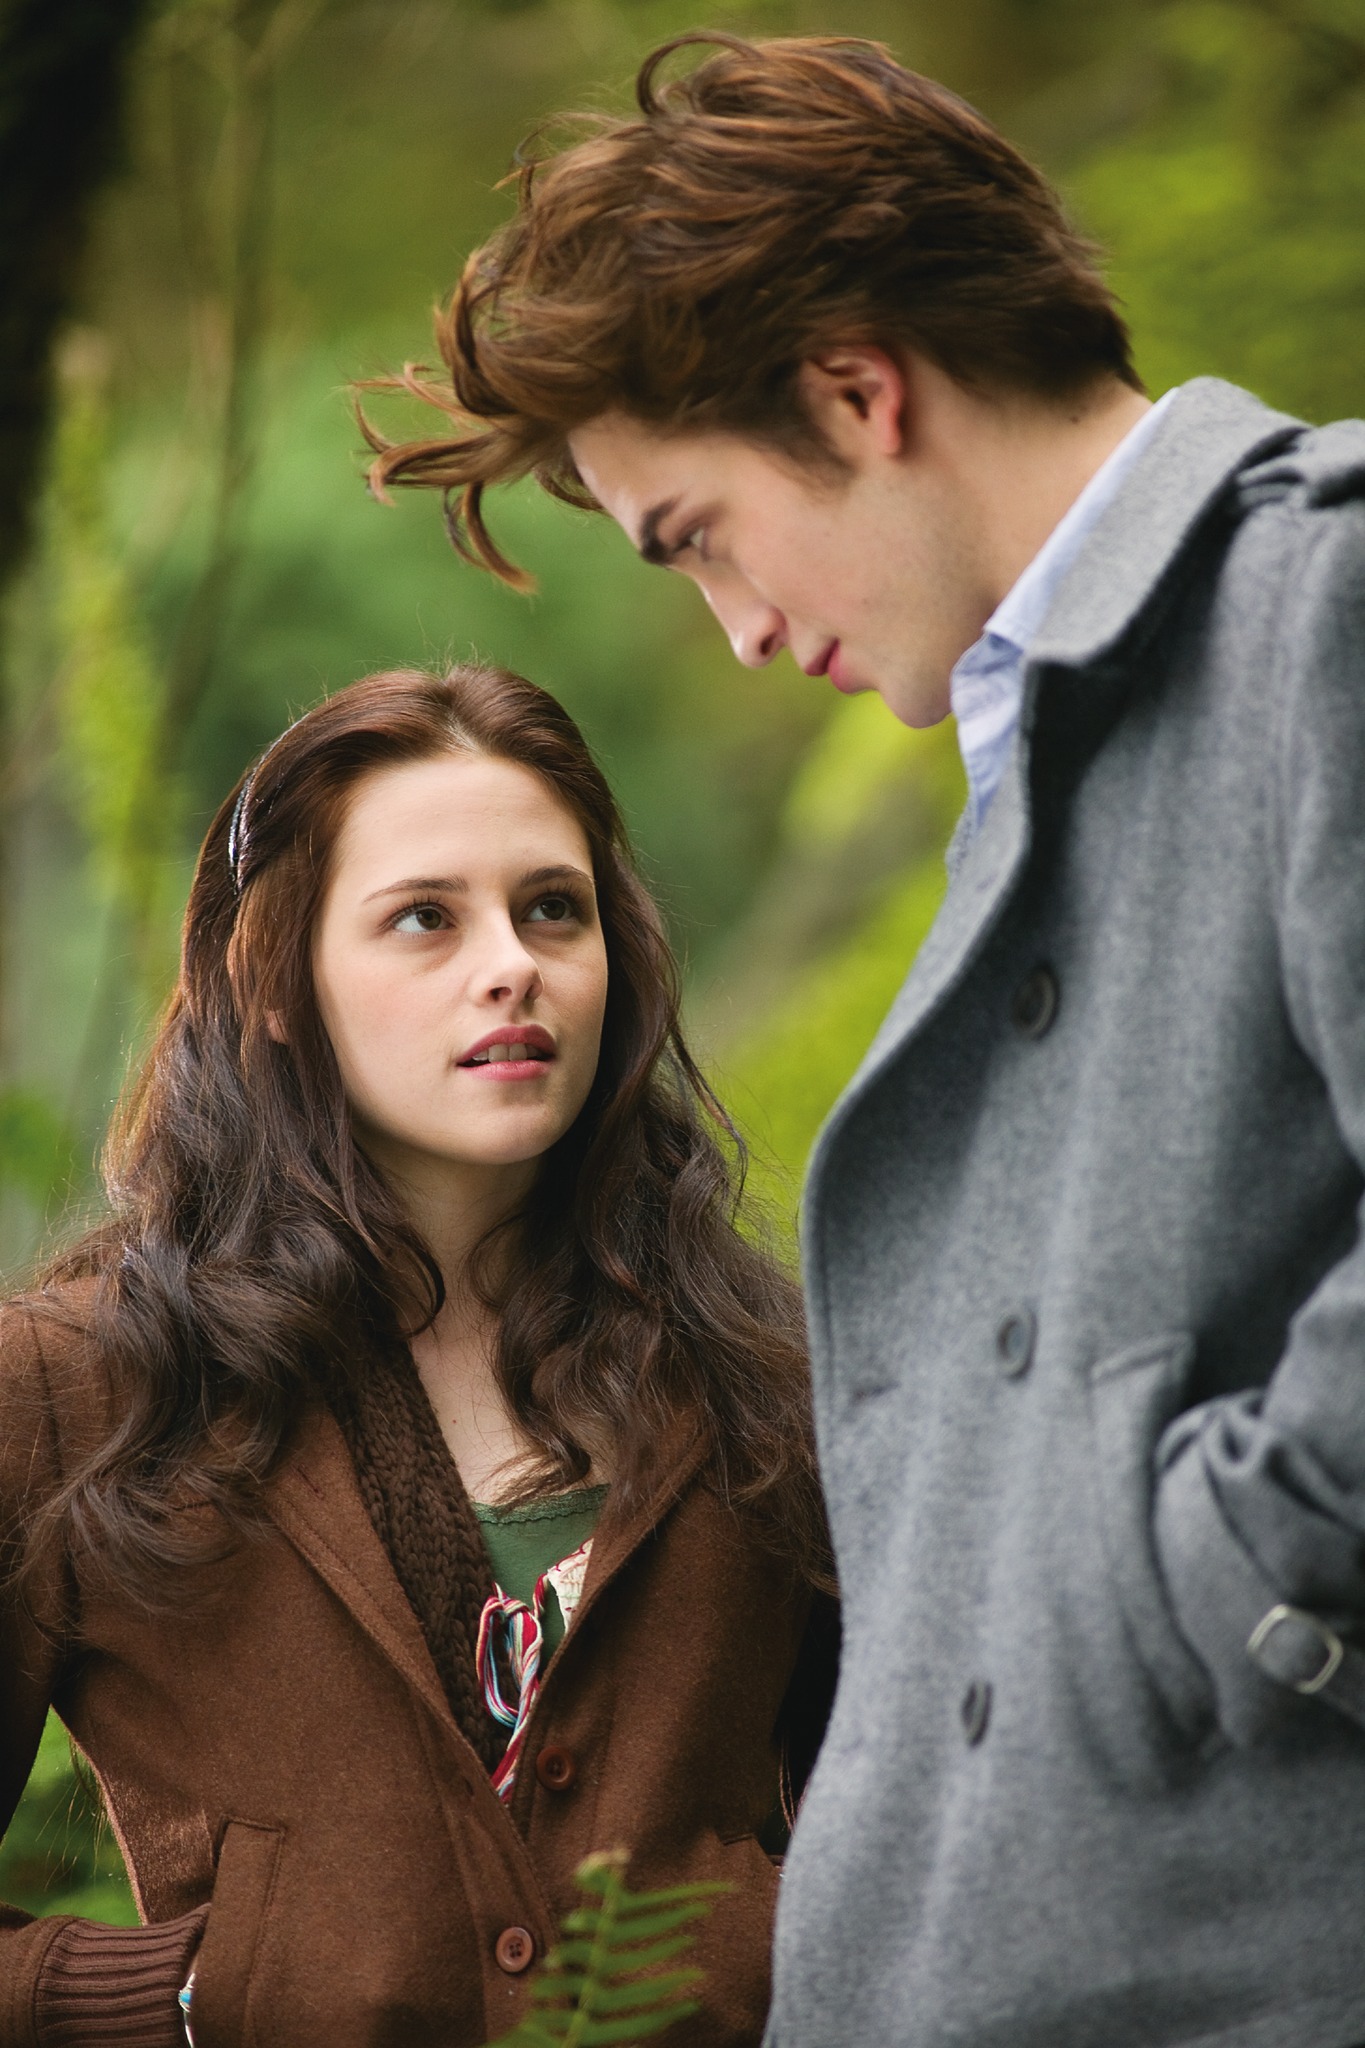 Kristen Stewart and Robert Pattinson in a behind-the-scene picture from 'Twilight'